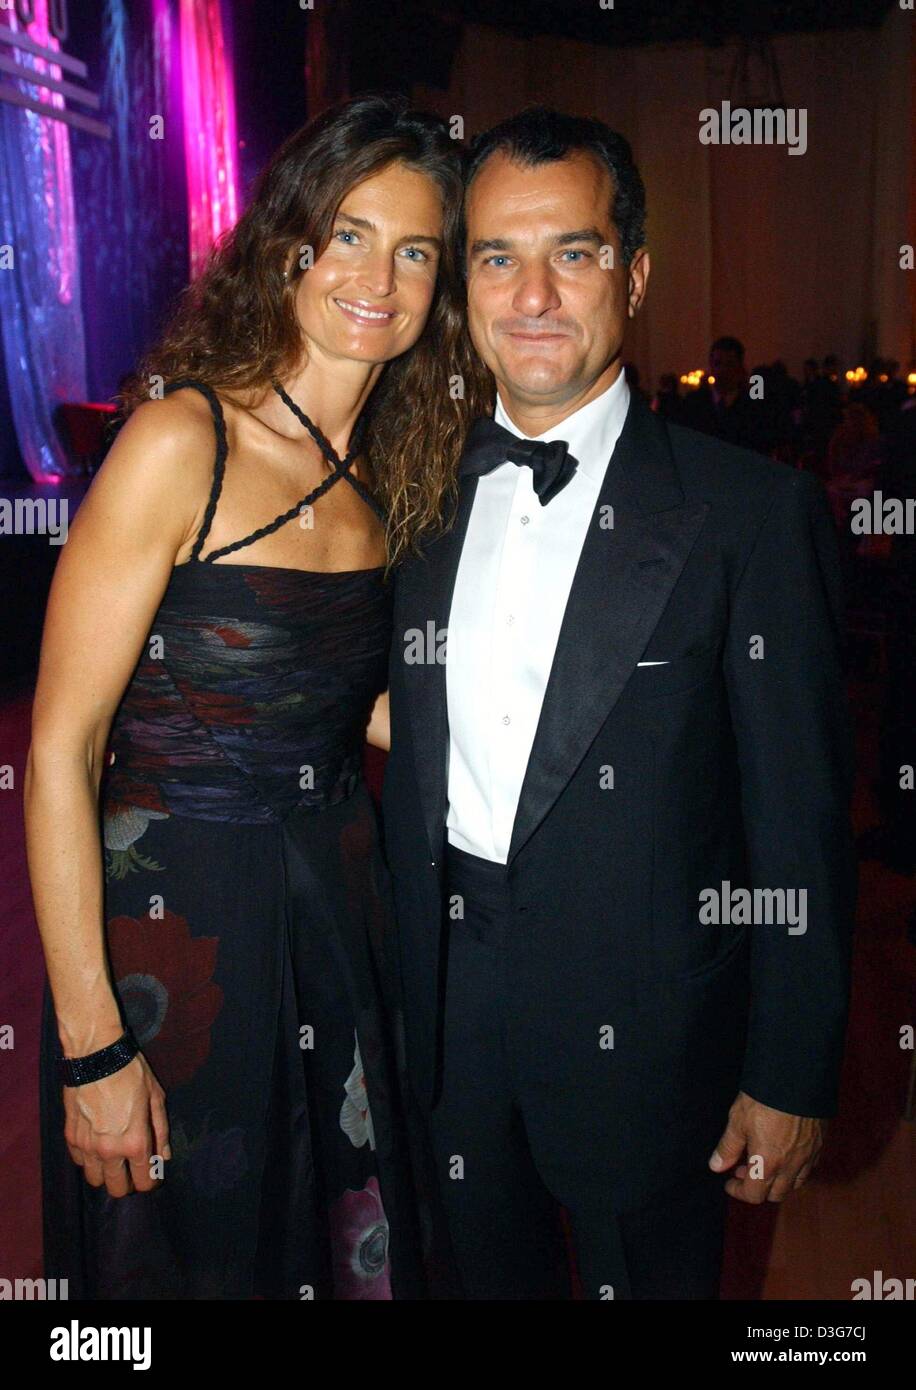 (dpa) - Leonardo Ferragamo, a family member of the Italian fashion group, and his wife Beatrice arrive to the UNESCO Children's Fund benefit gala held at a hotel in Neuss, Germany, 8 November 2003. 1,400 celebrities and politicians attended the charity gala organised by Unesco representative Ohoven. Last year, in a similar event 1.3 million euros were raised for Unesco projects. Stock Photo